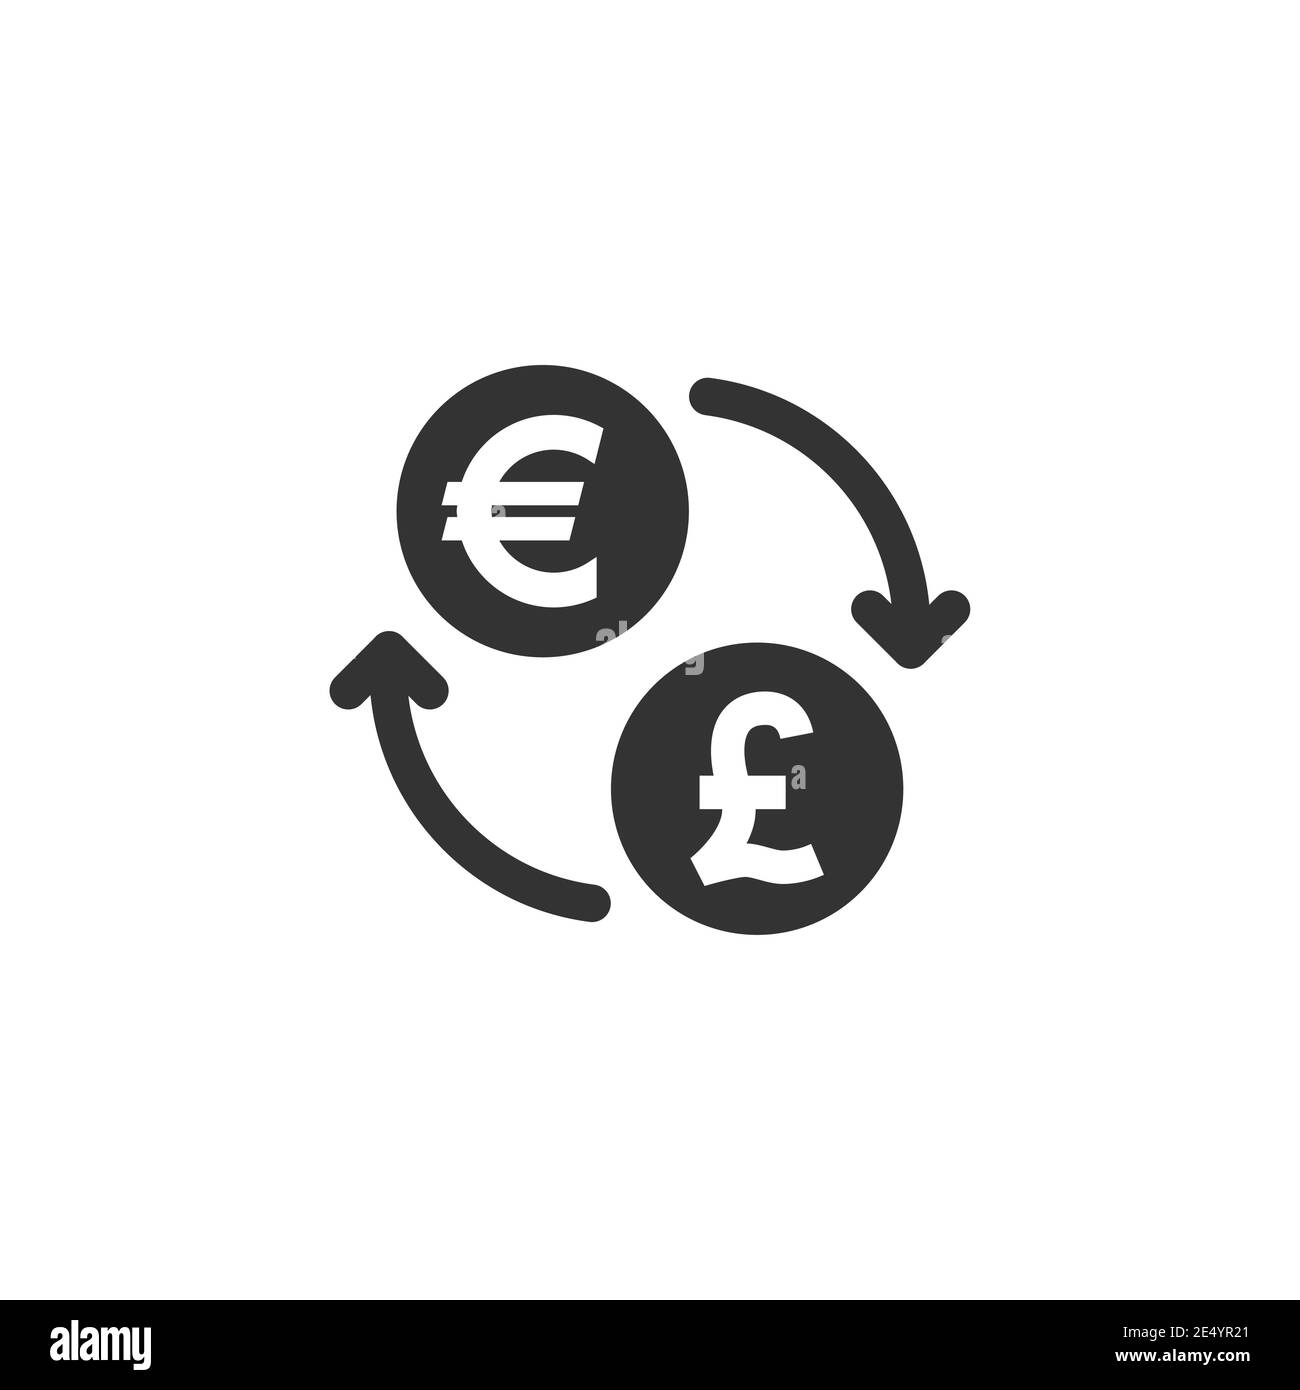 Euro and british pound exchange vector icon. Money currency coin with arrows or loop symbol. Stock Vector